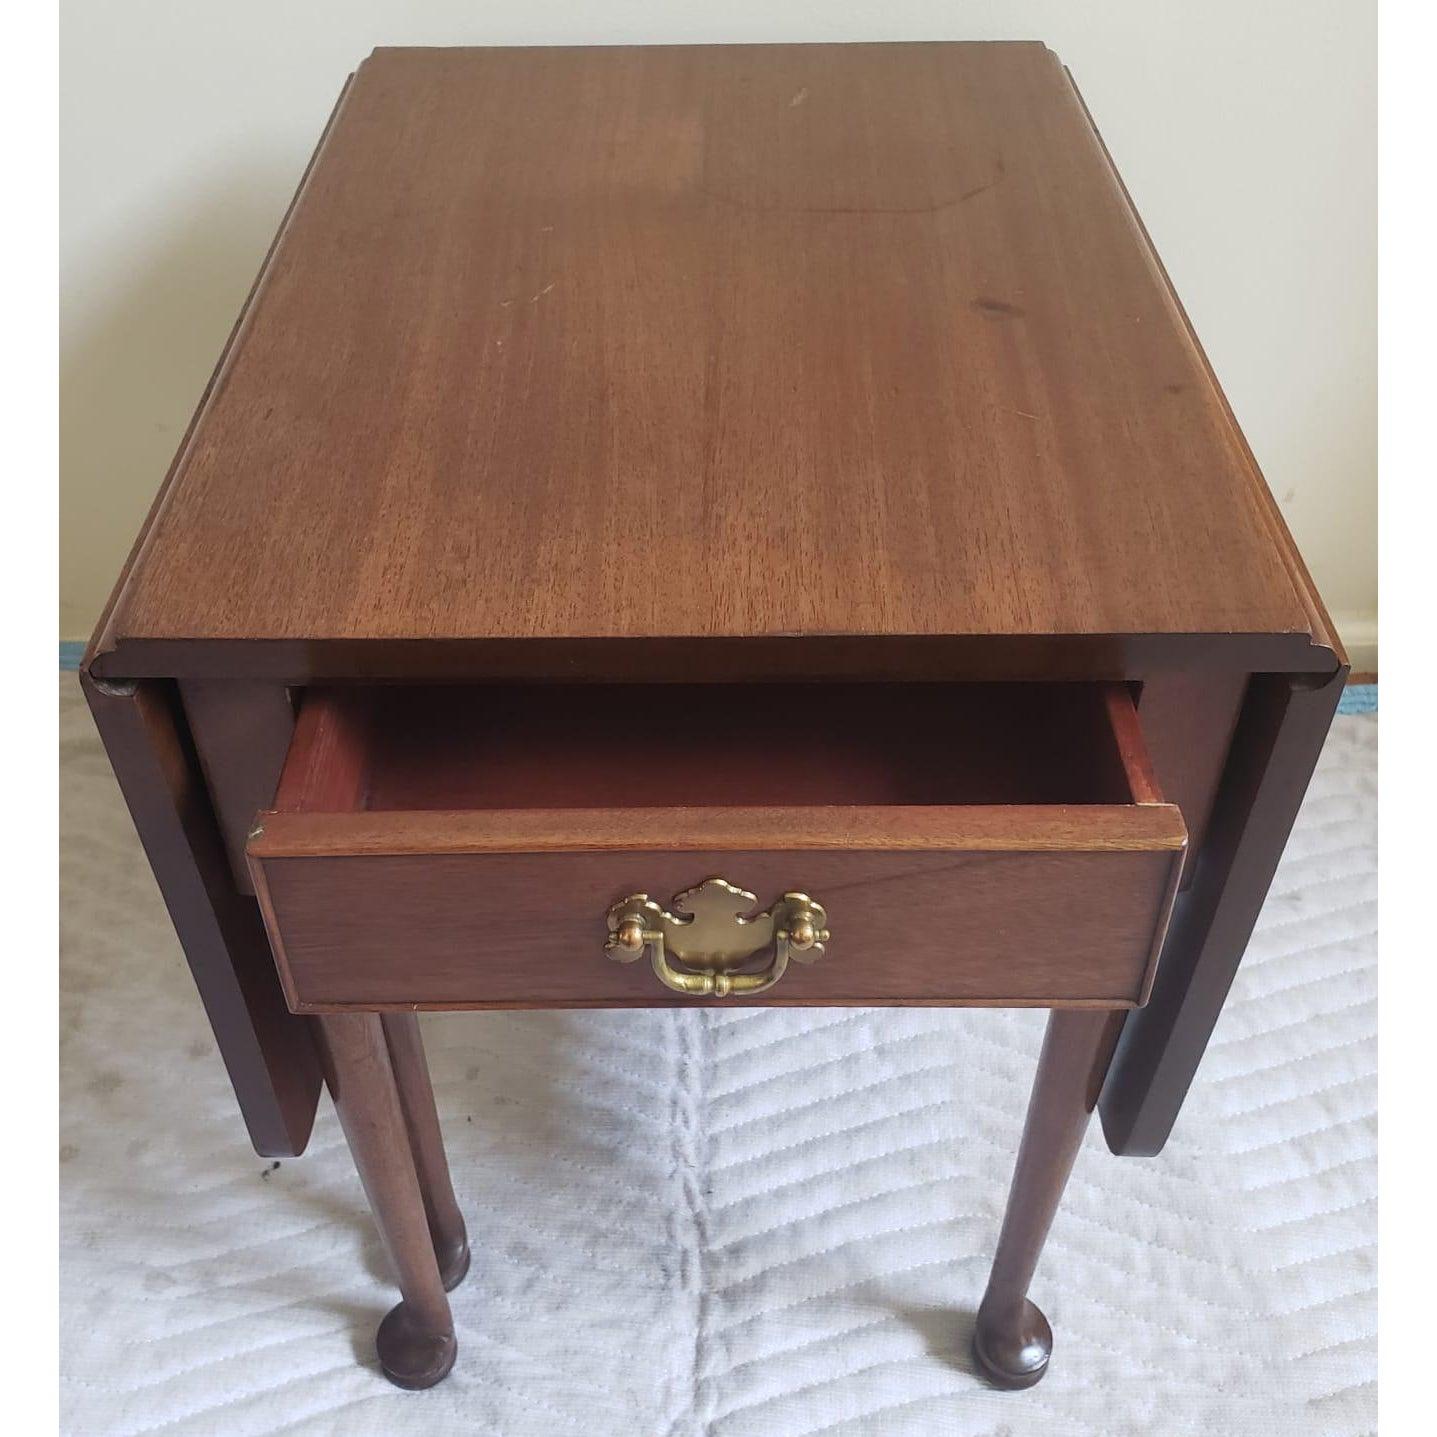 North American Biggs Kittinger Chippendale Mahogany Drop Leaf Table For Sale